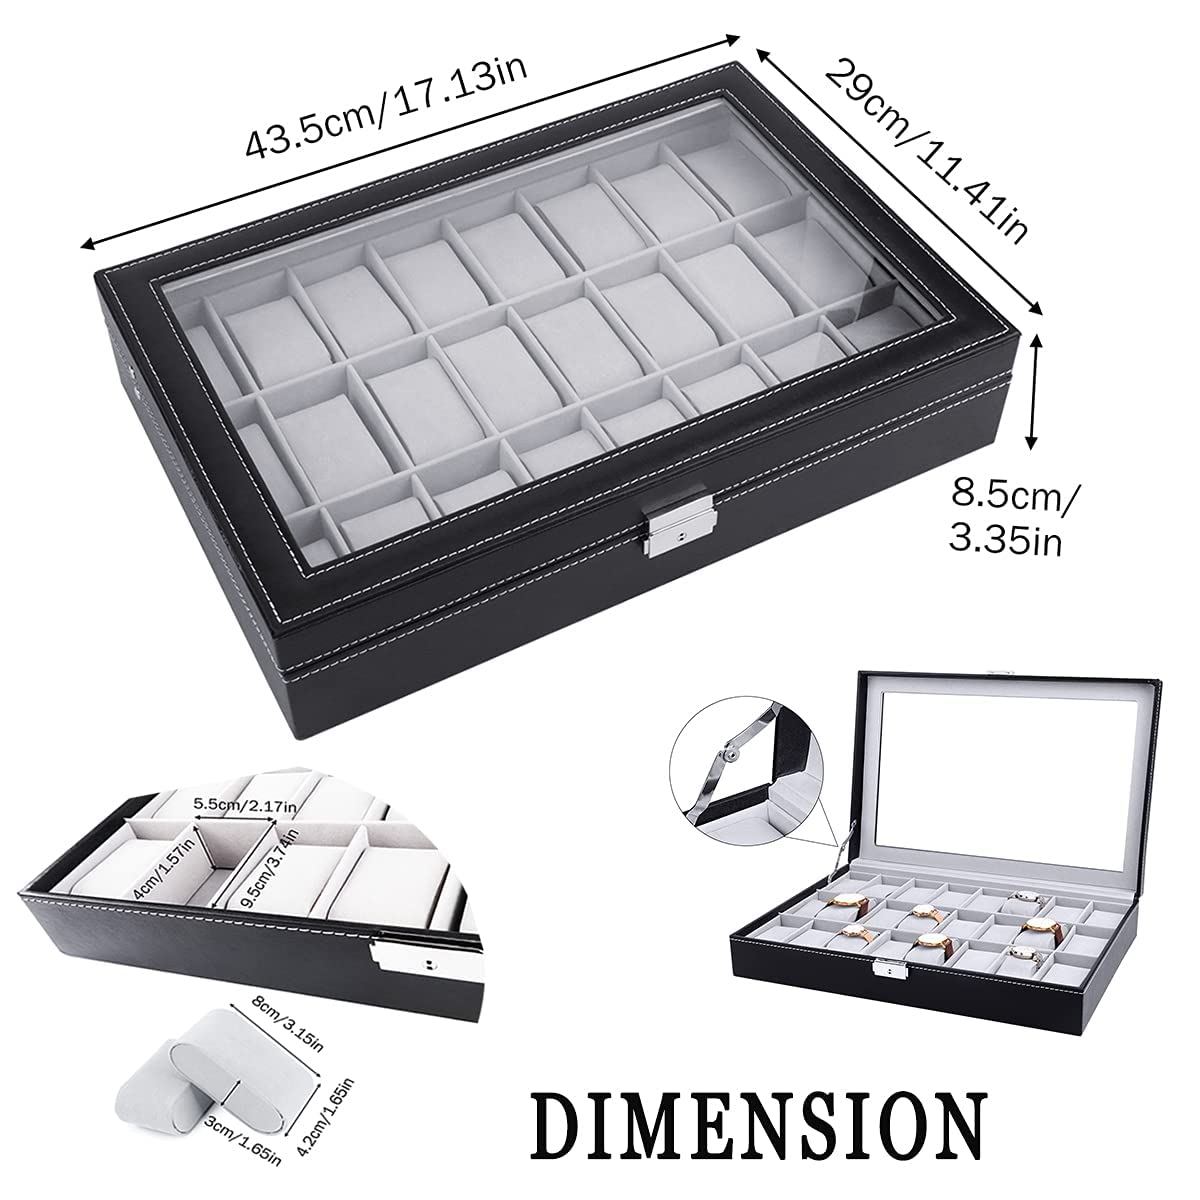 HUAXXIA Watch Box 24 Slots Jewelry Case for Men, Watch Case Lockable Storage Organizer with Clear Top, Removable Pillow Velvet Lining, Outstanding PU Leather, Big Collection Box Christmas Gift